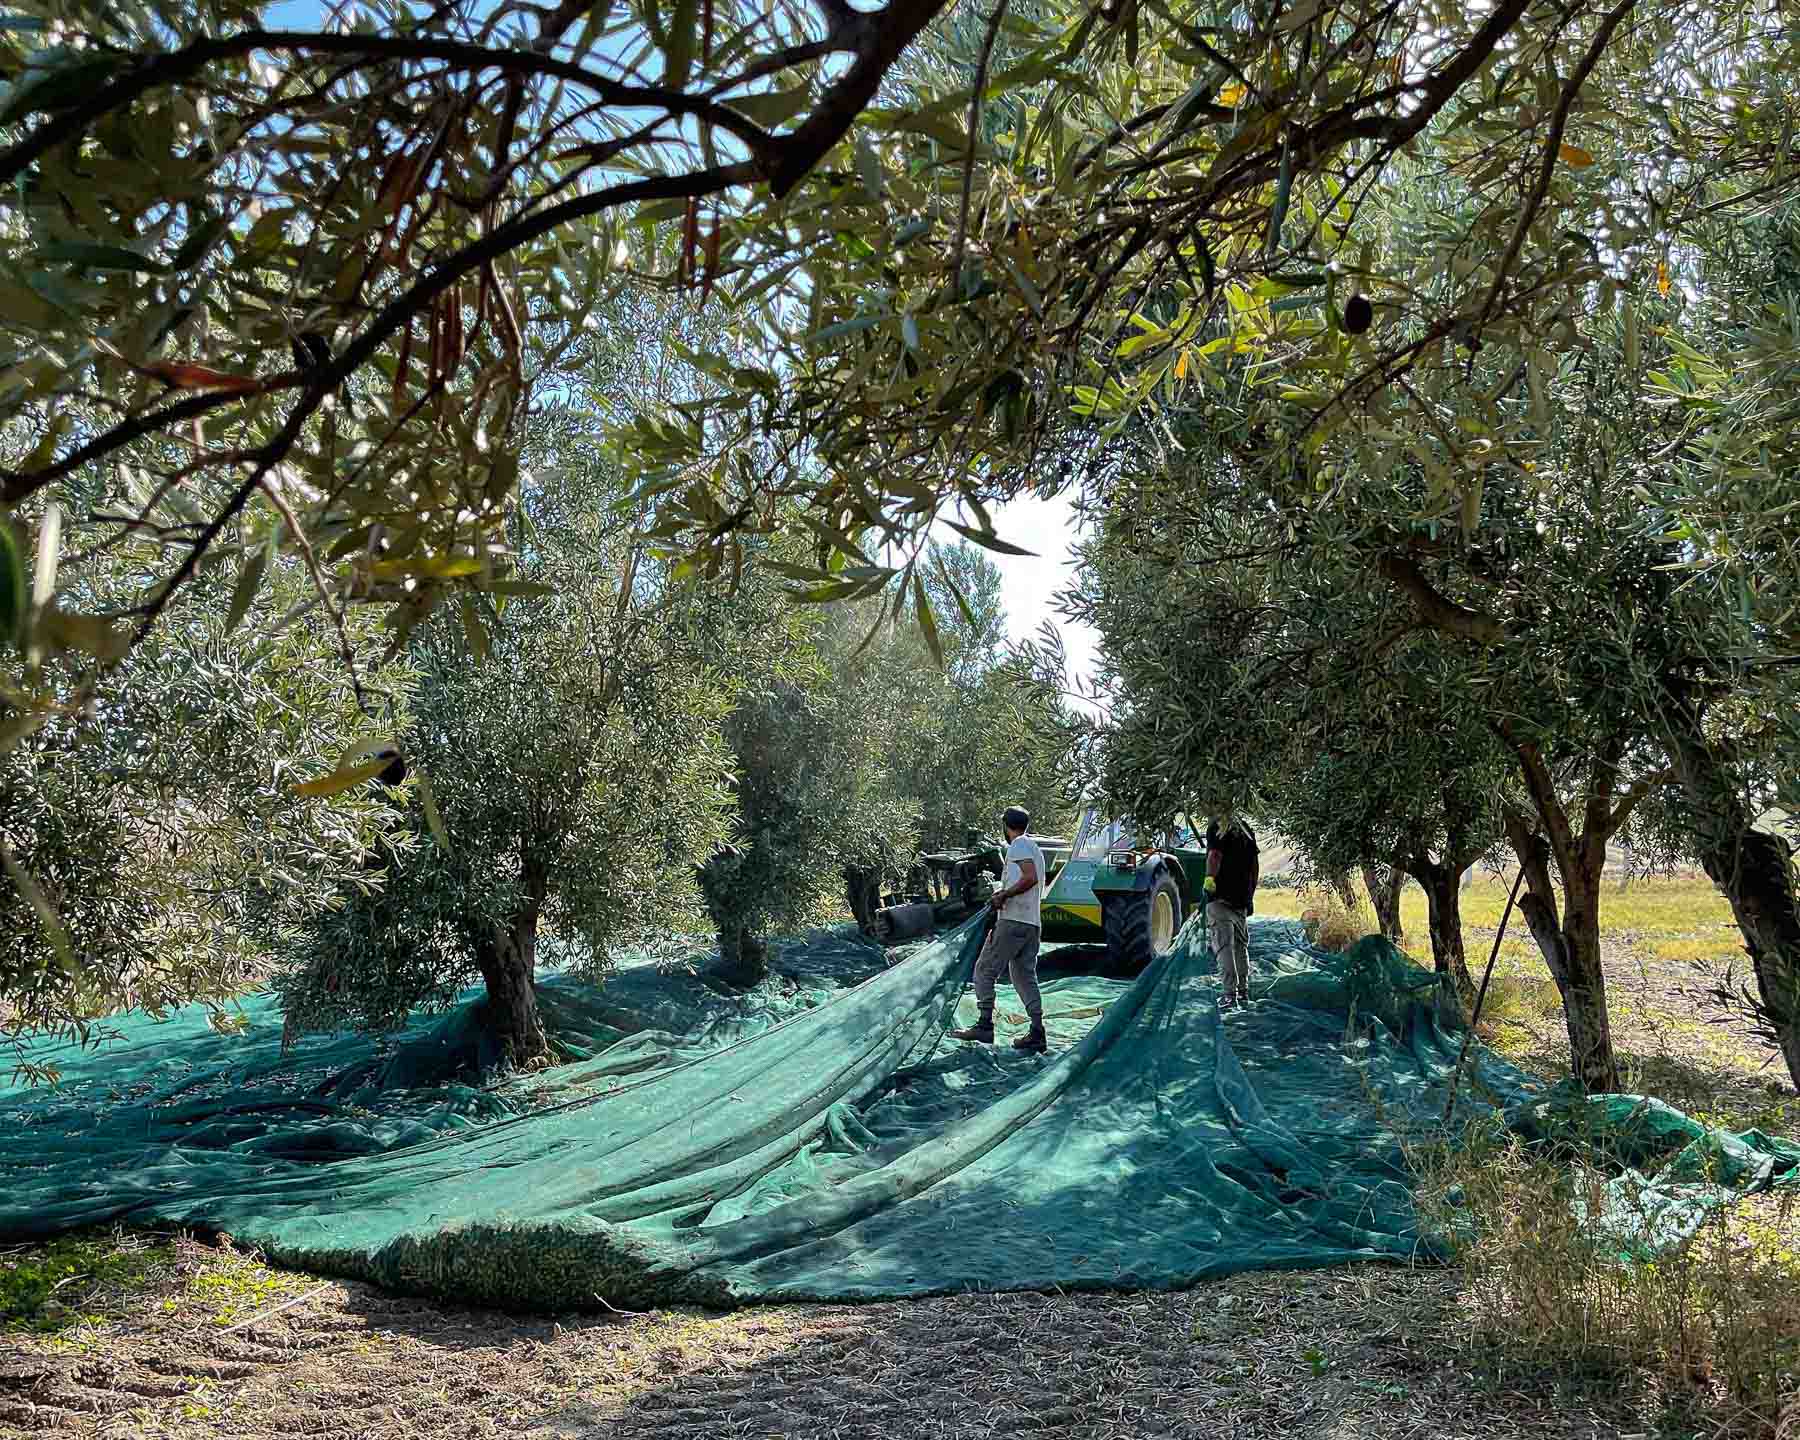 Olive Inflorescence and Pollination – EXAU Olive Oil